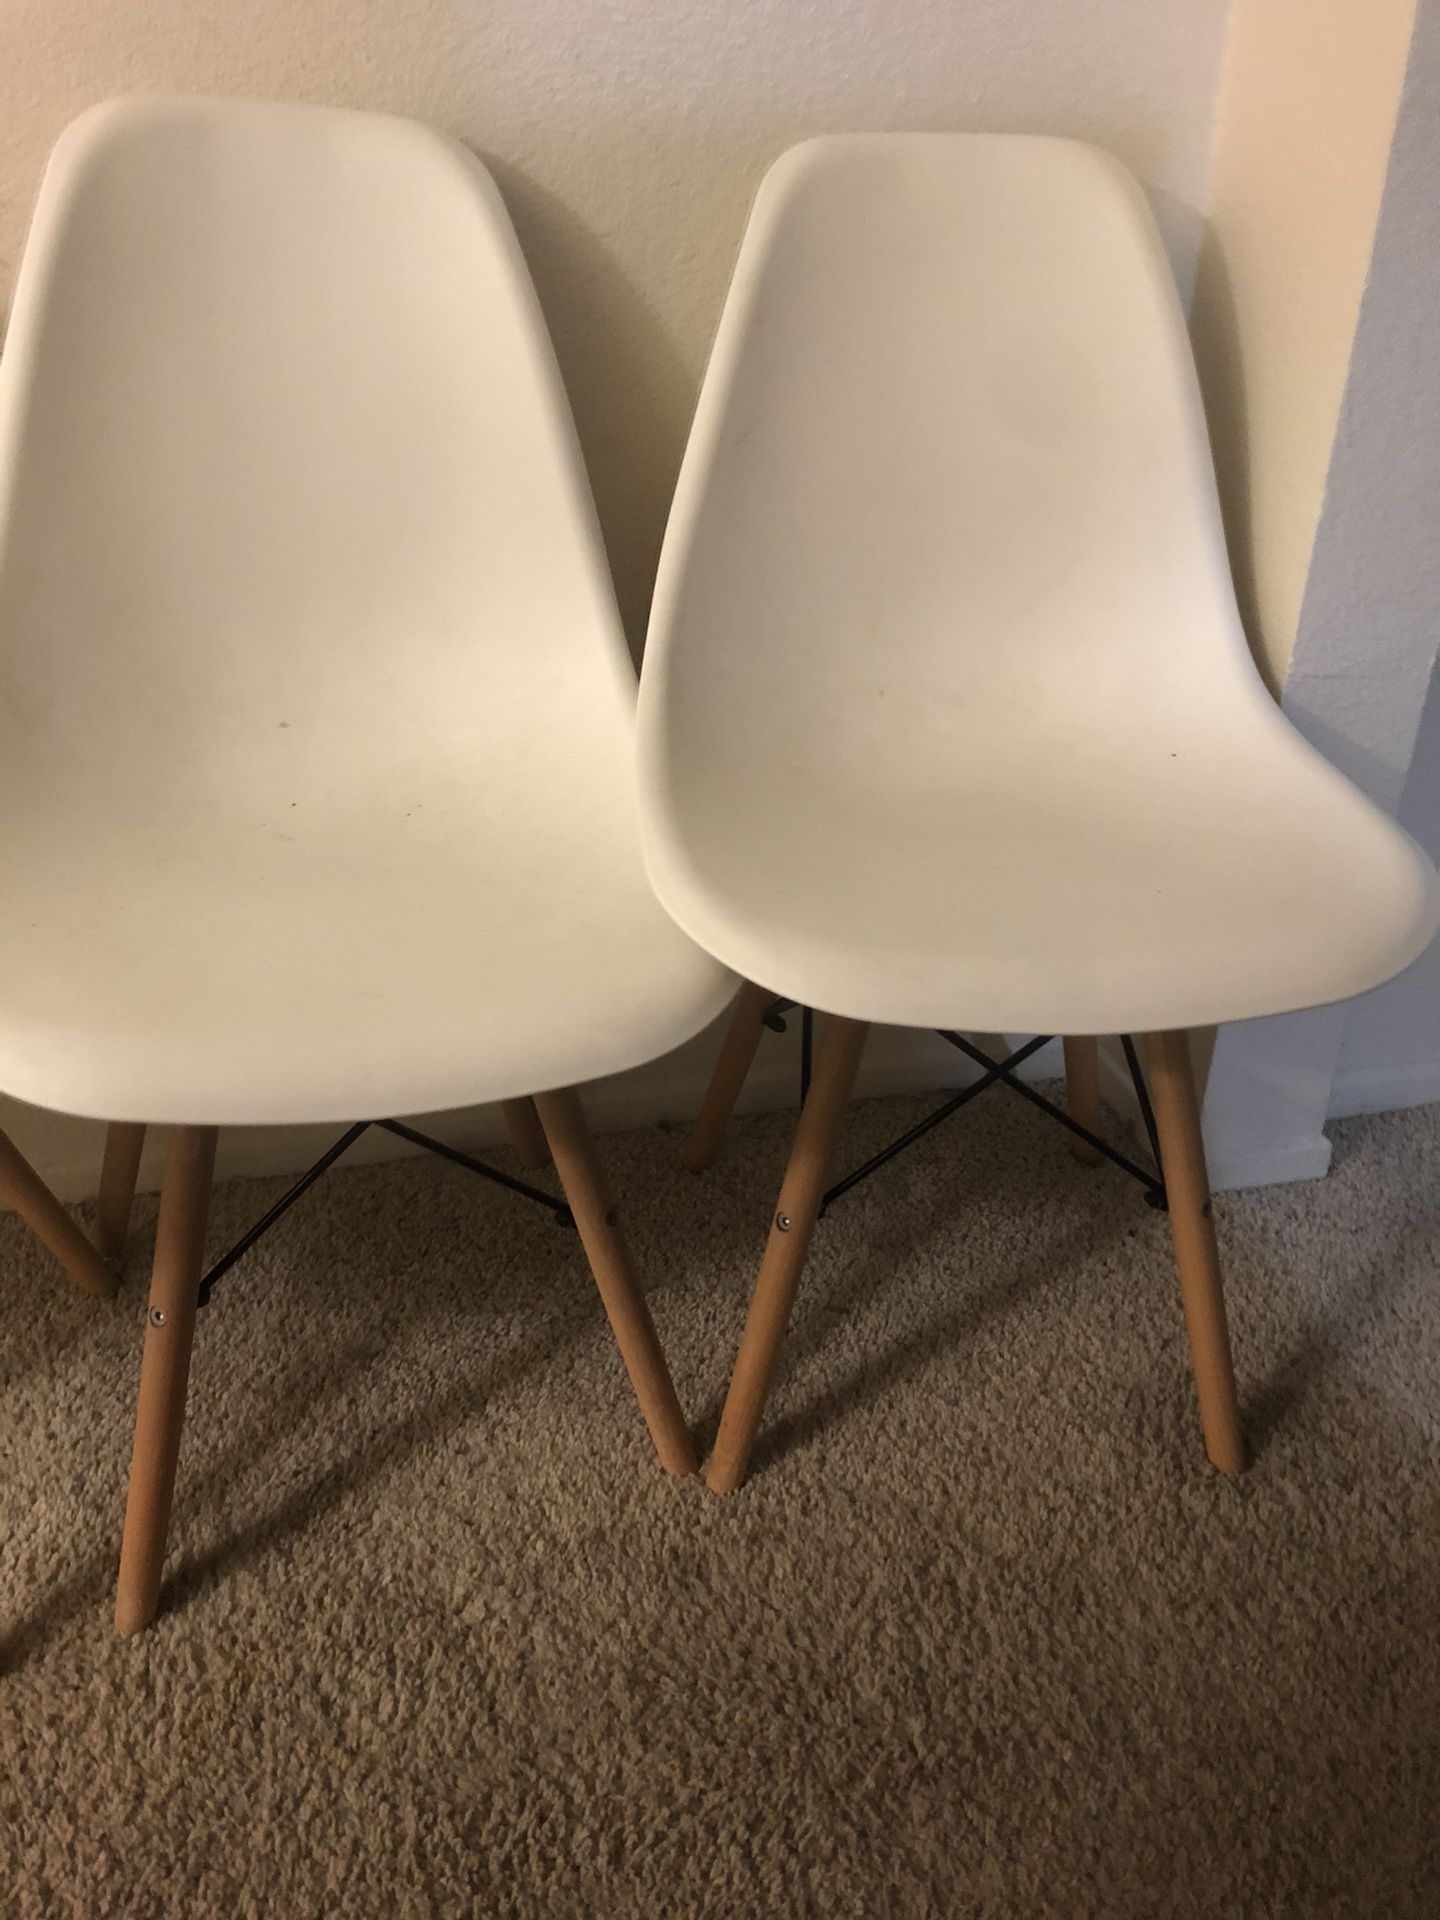 Chair Set of 4 w/ Collapsible Table